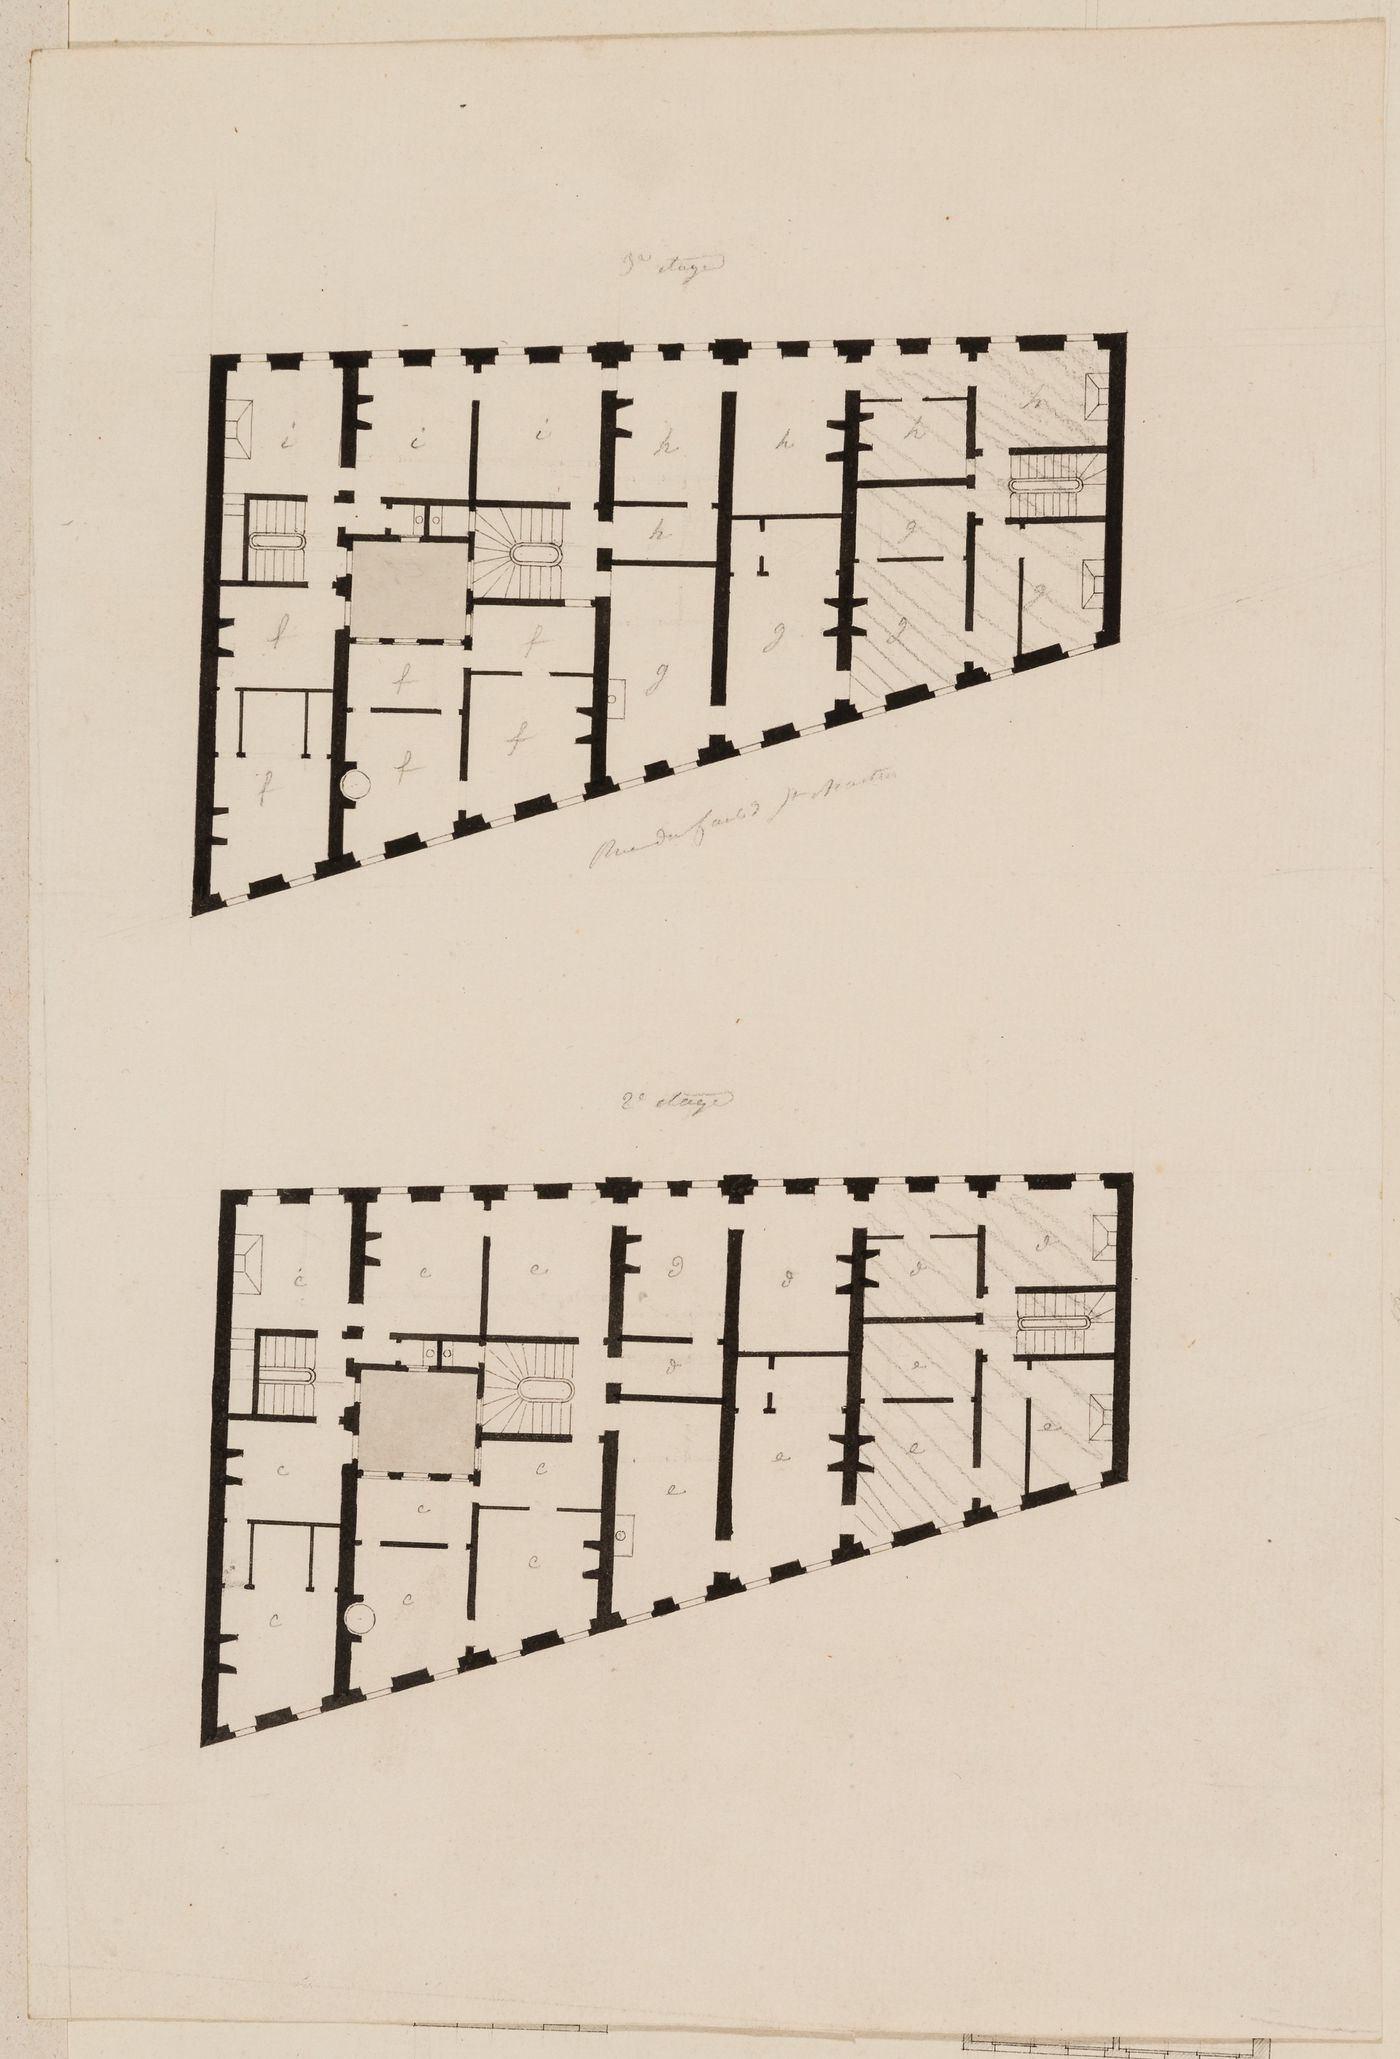 Project for alterations to the caserne de gendarmerie, rue du Faubourg-Saint-Martin: Partial second and third floor plans